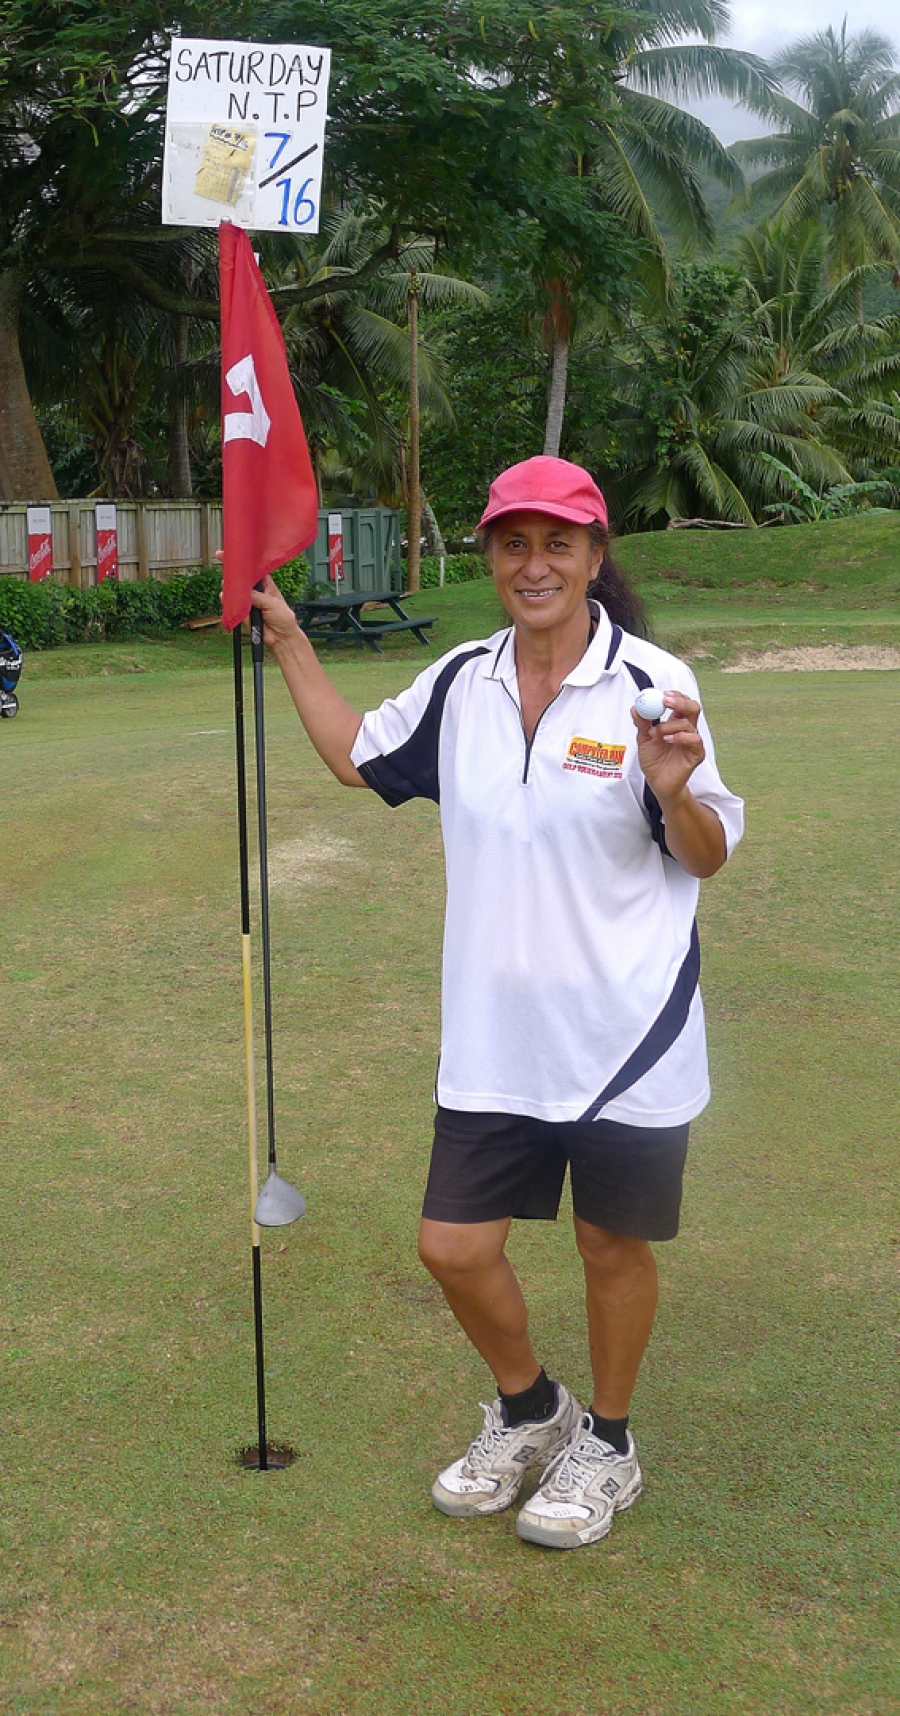 Passionate golfer rewarded with ace